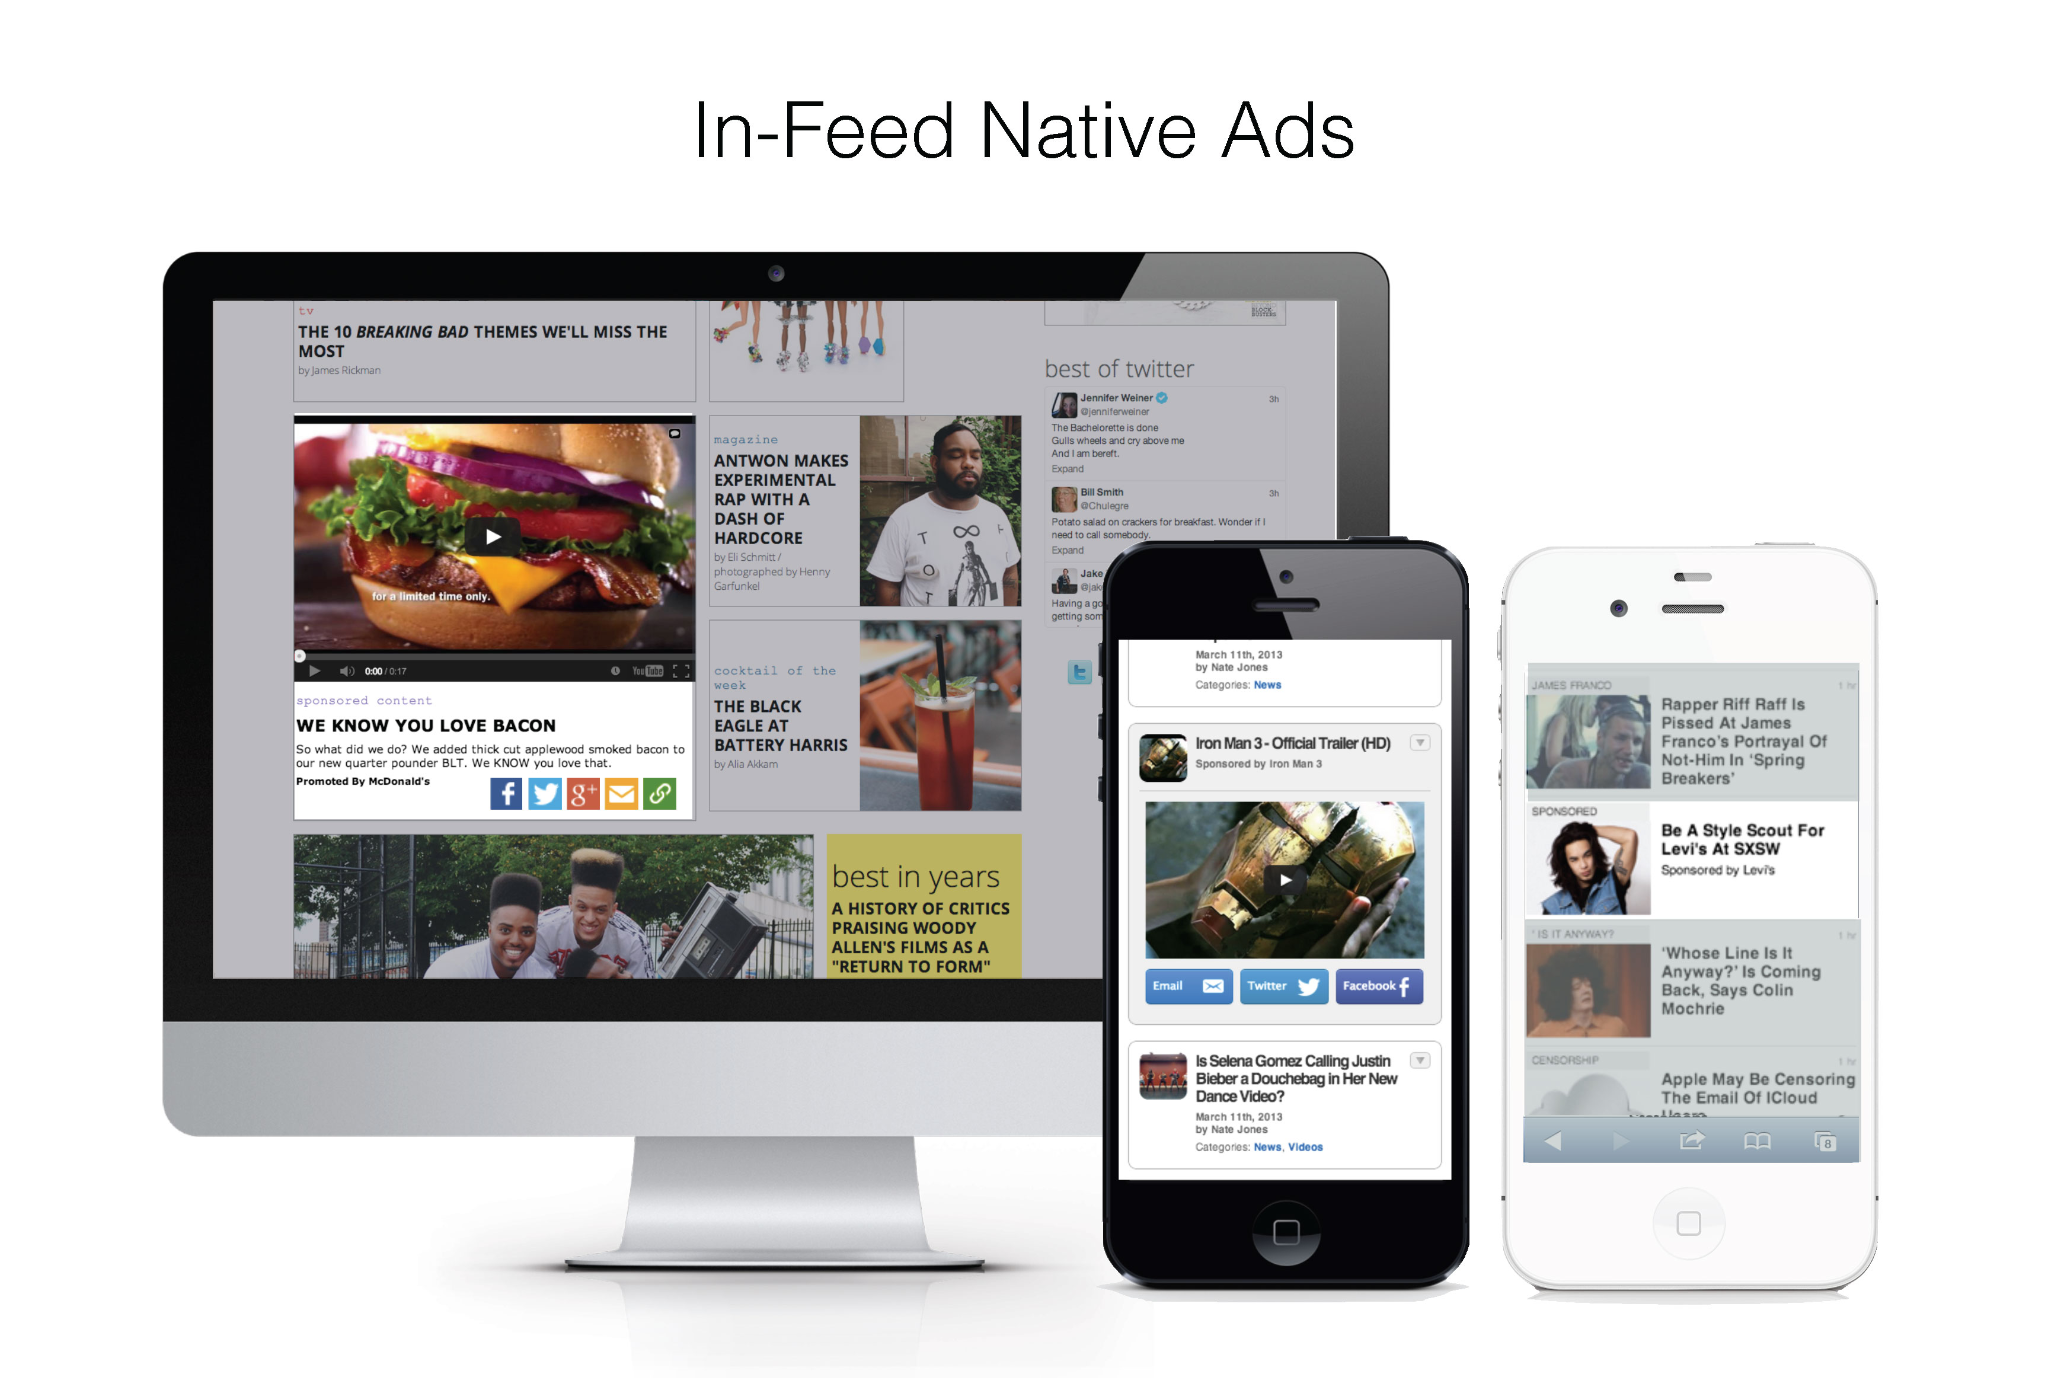 In-feed native ads are integrated in the content itself